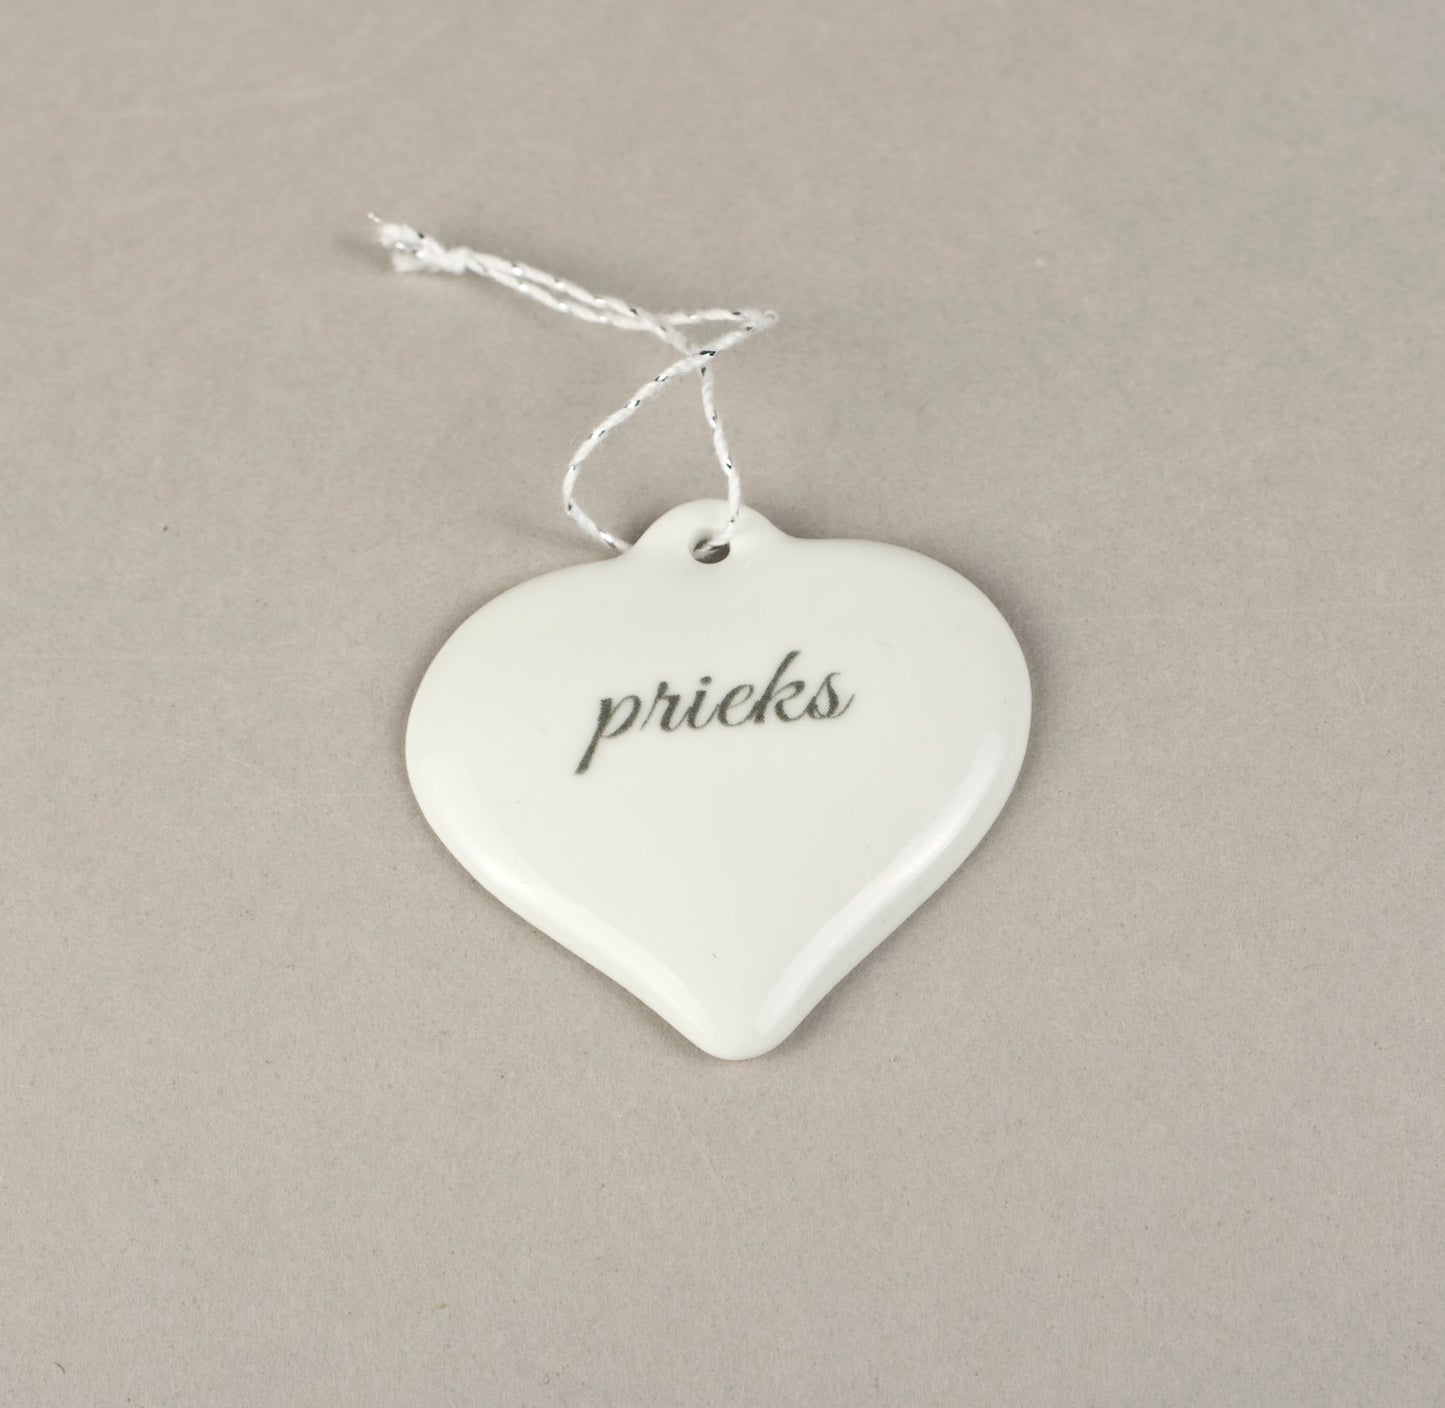 Porcelain Decorations For Christmas Trees - Heart With Print